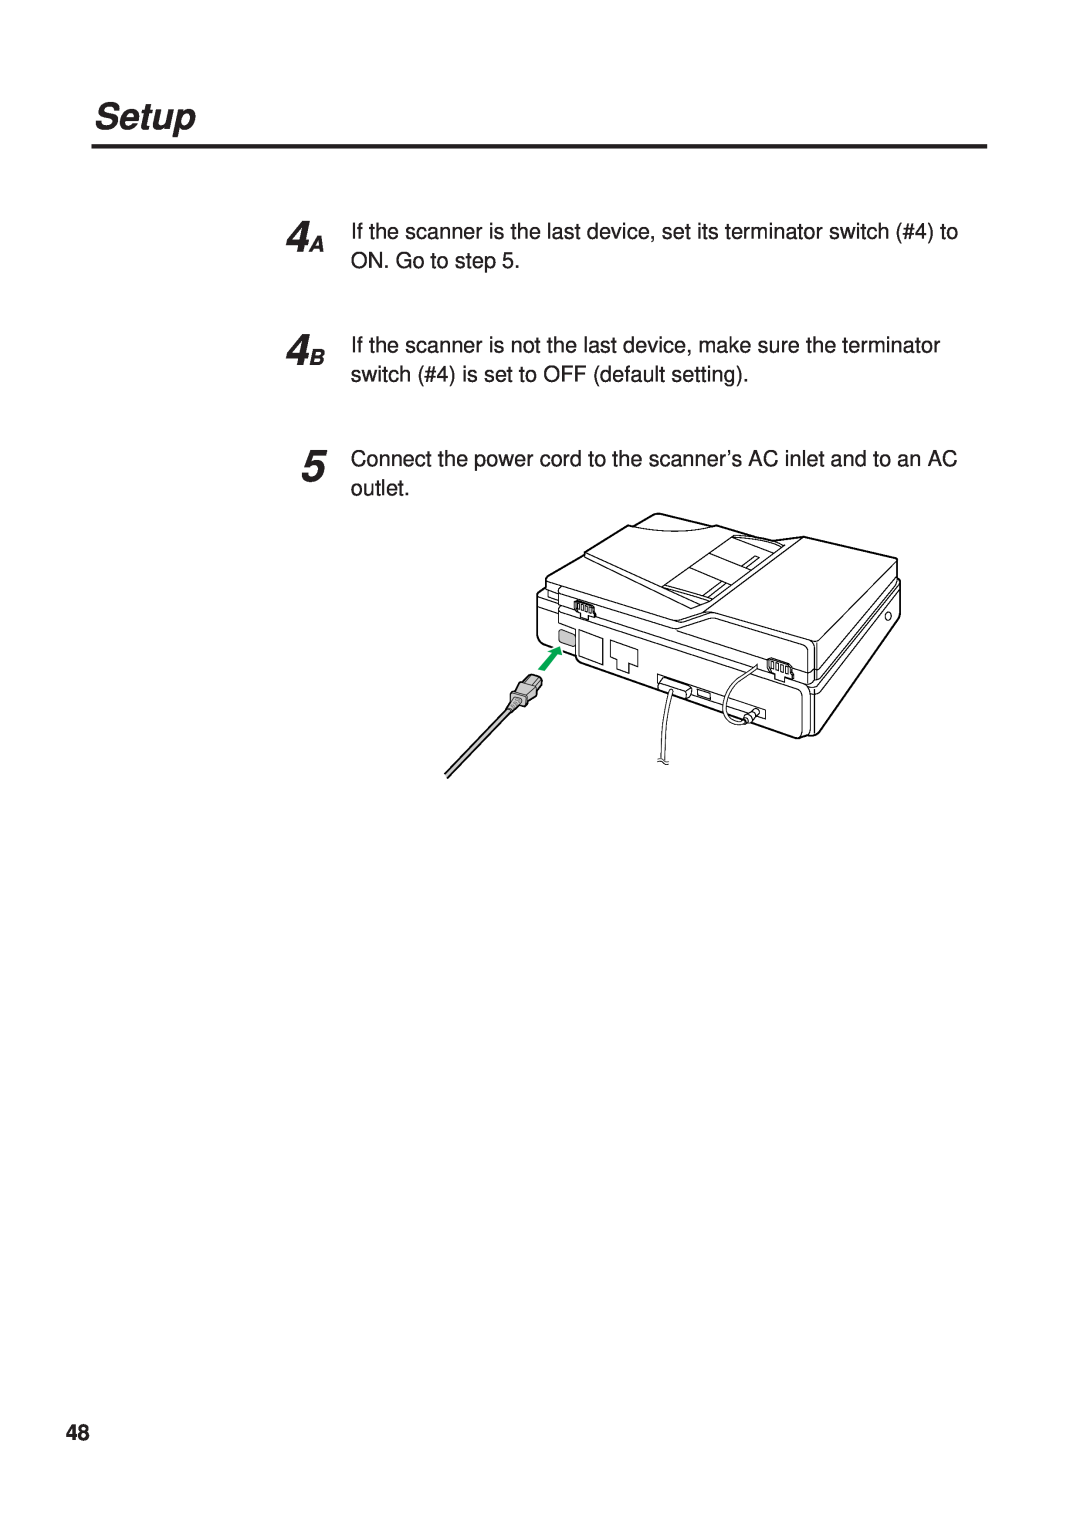 Panasonic KX-PS8000 manual 4A 4B, Setup, Connect the power cord to the scanner’s AC inlet and to an AC, outlet 